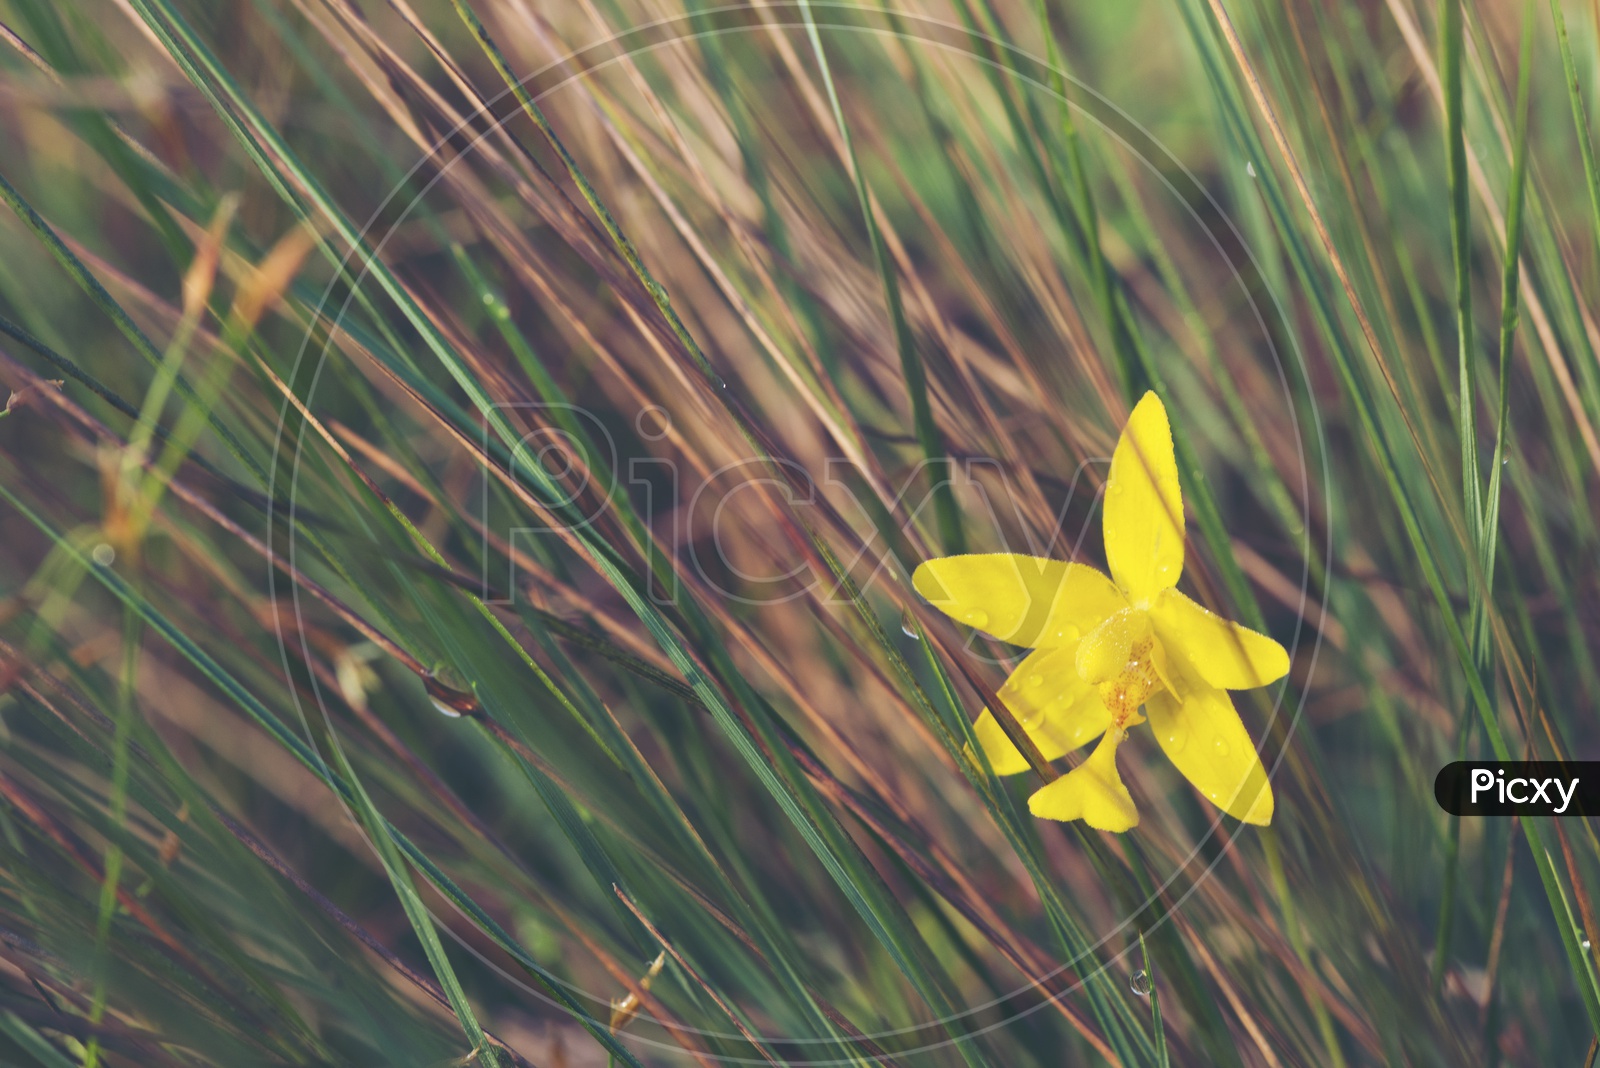 Yellow Flower With Tropical Grass Background